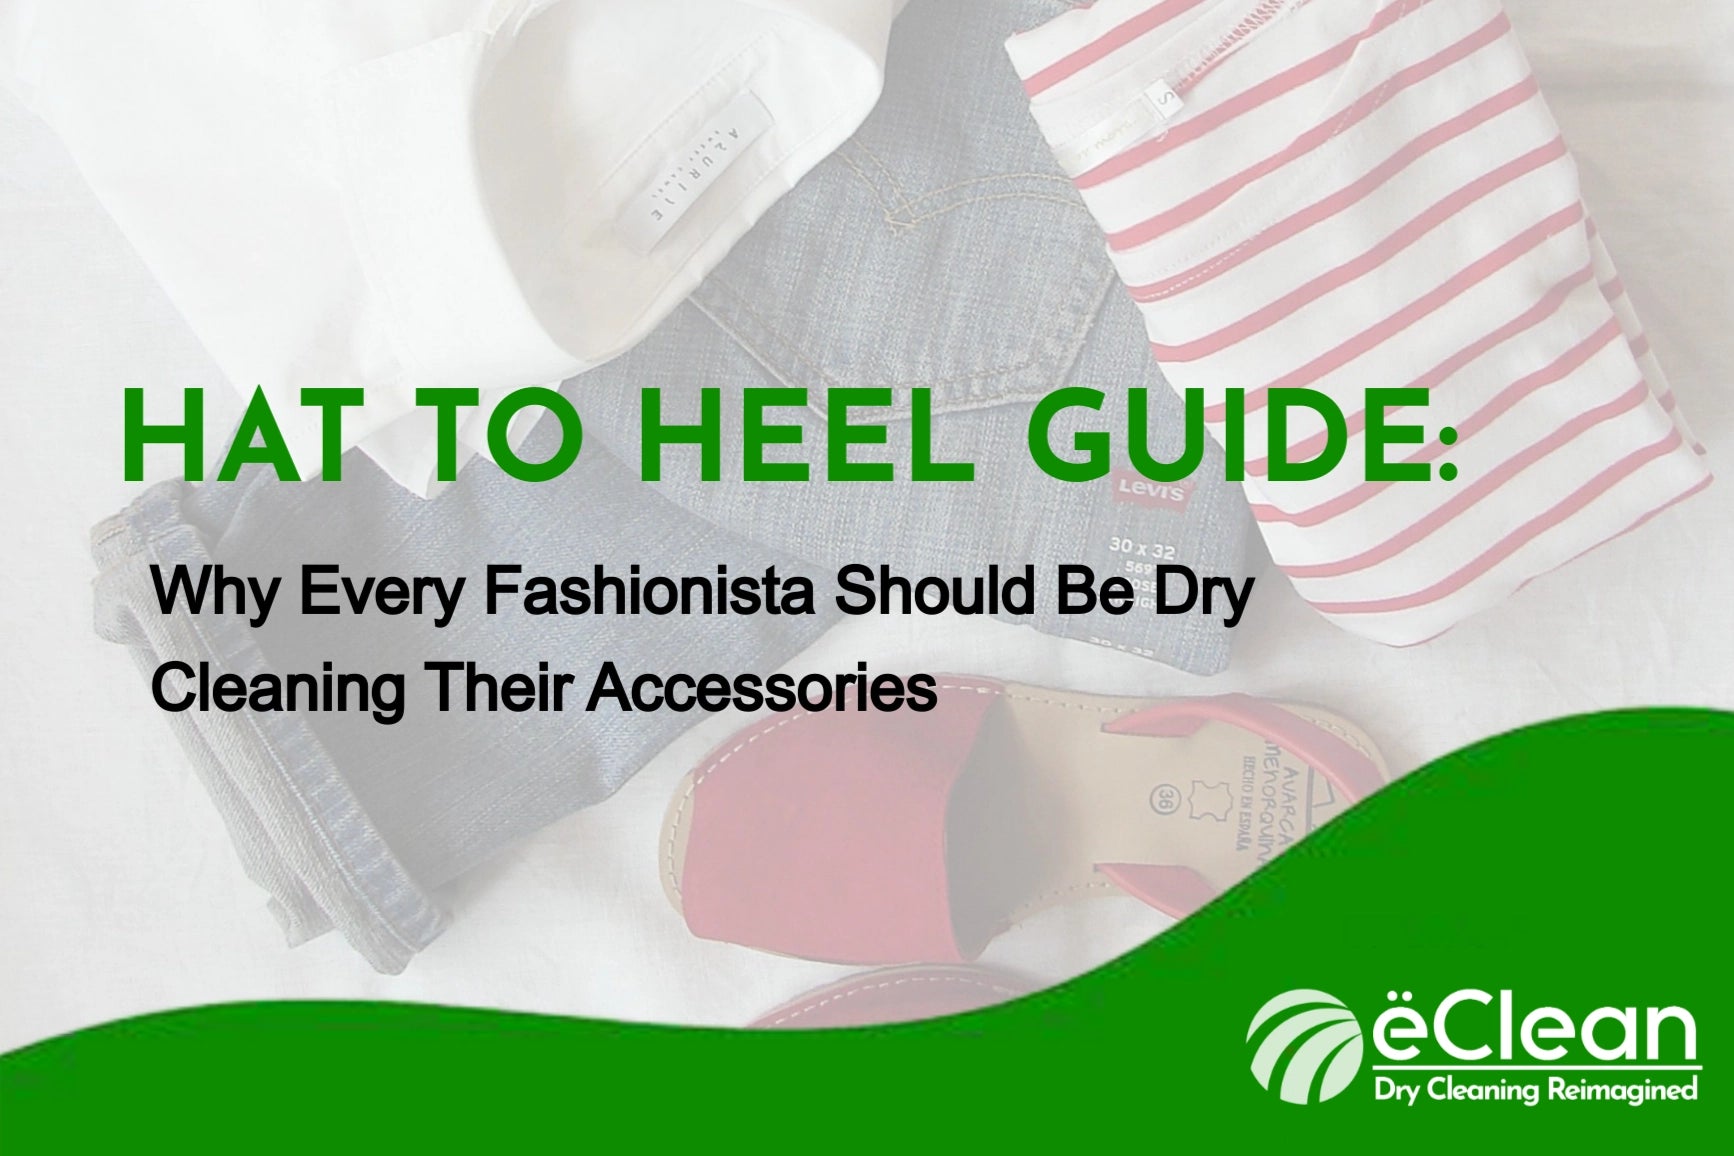 The Hat to Heel Guide: Why Every Fashionista Should Be Dry Cleaning Their Accessories